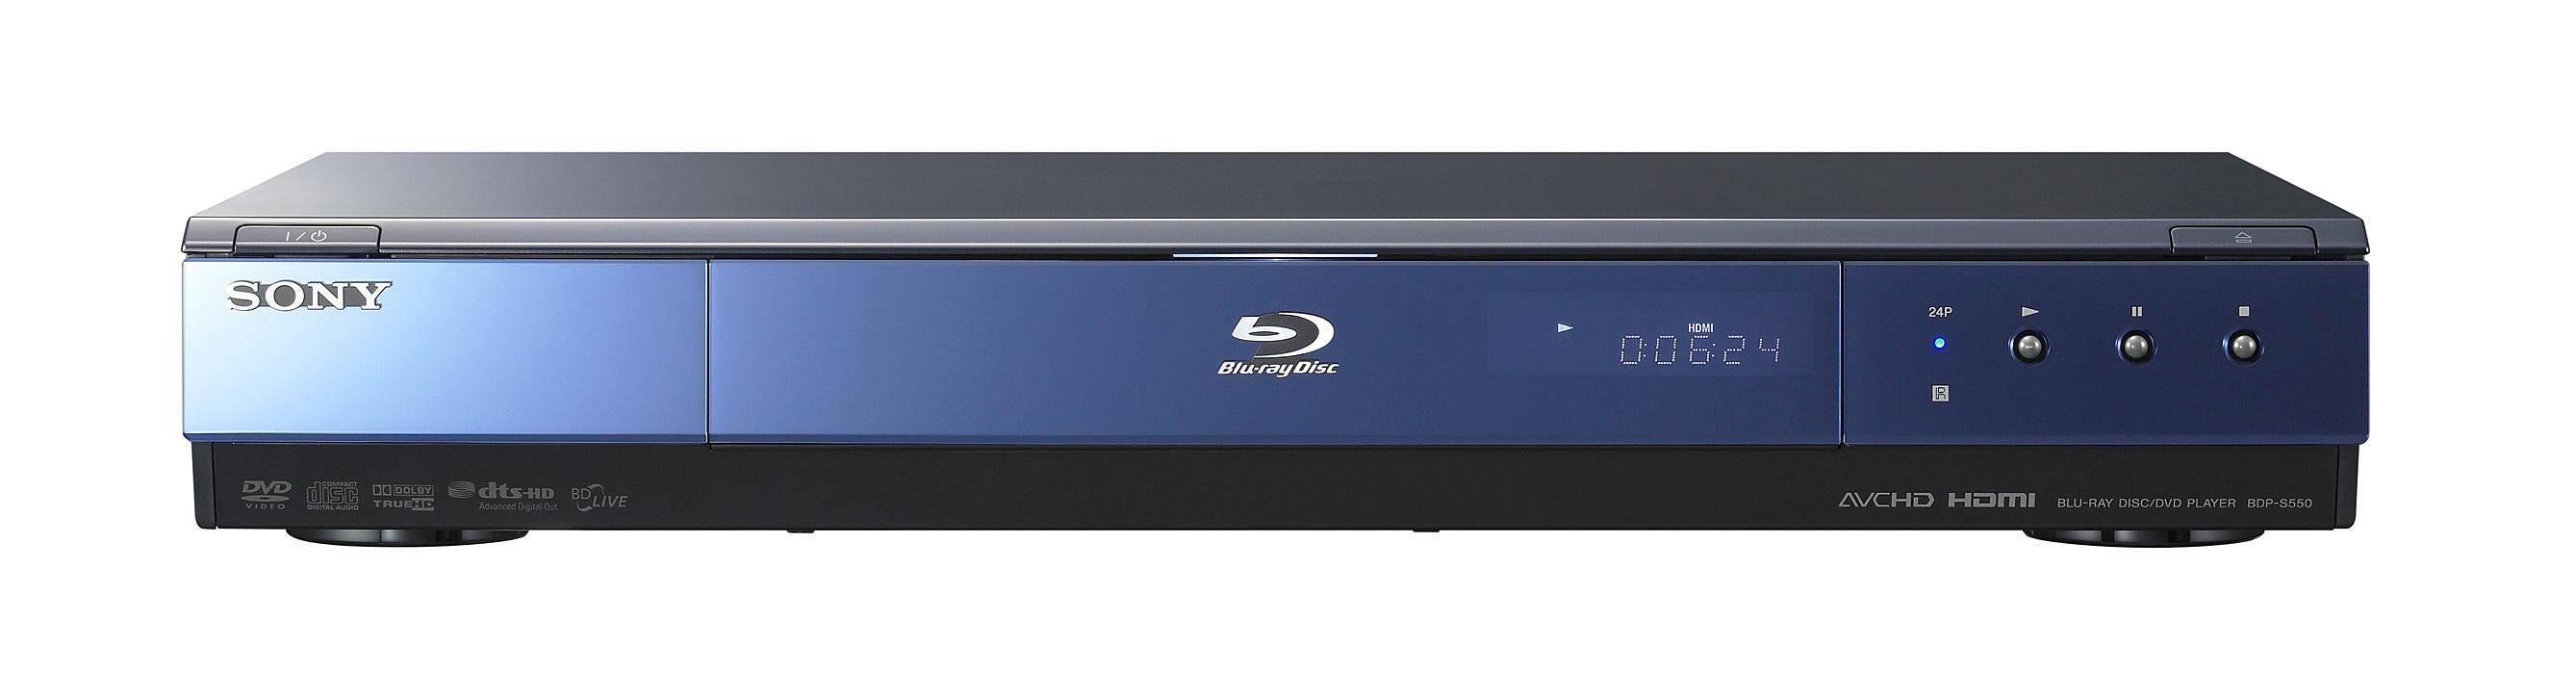 Lecteur Blu-Ray Disc? Sony BDP-S550